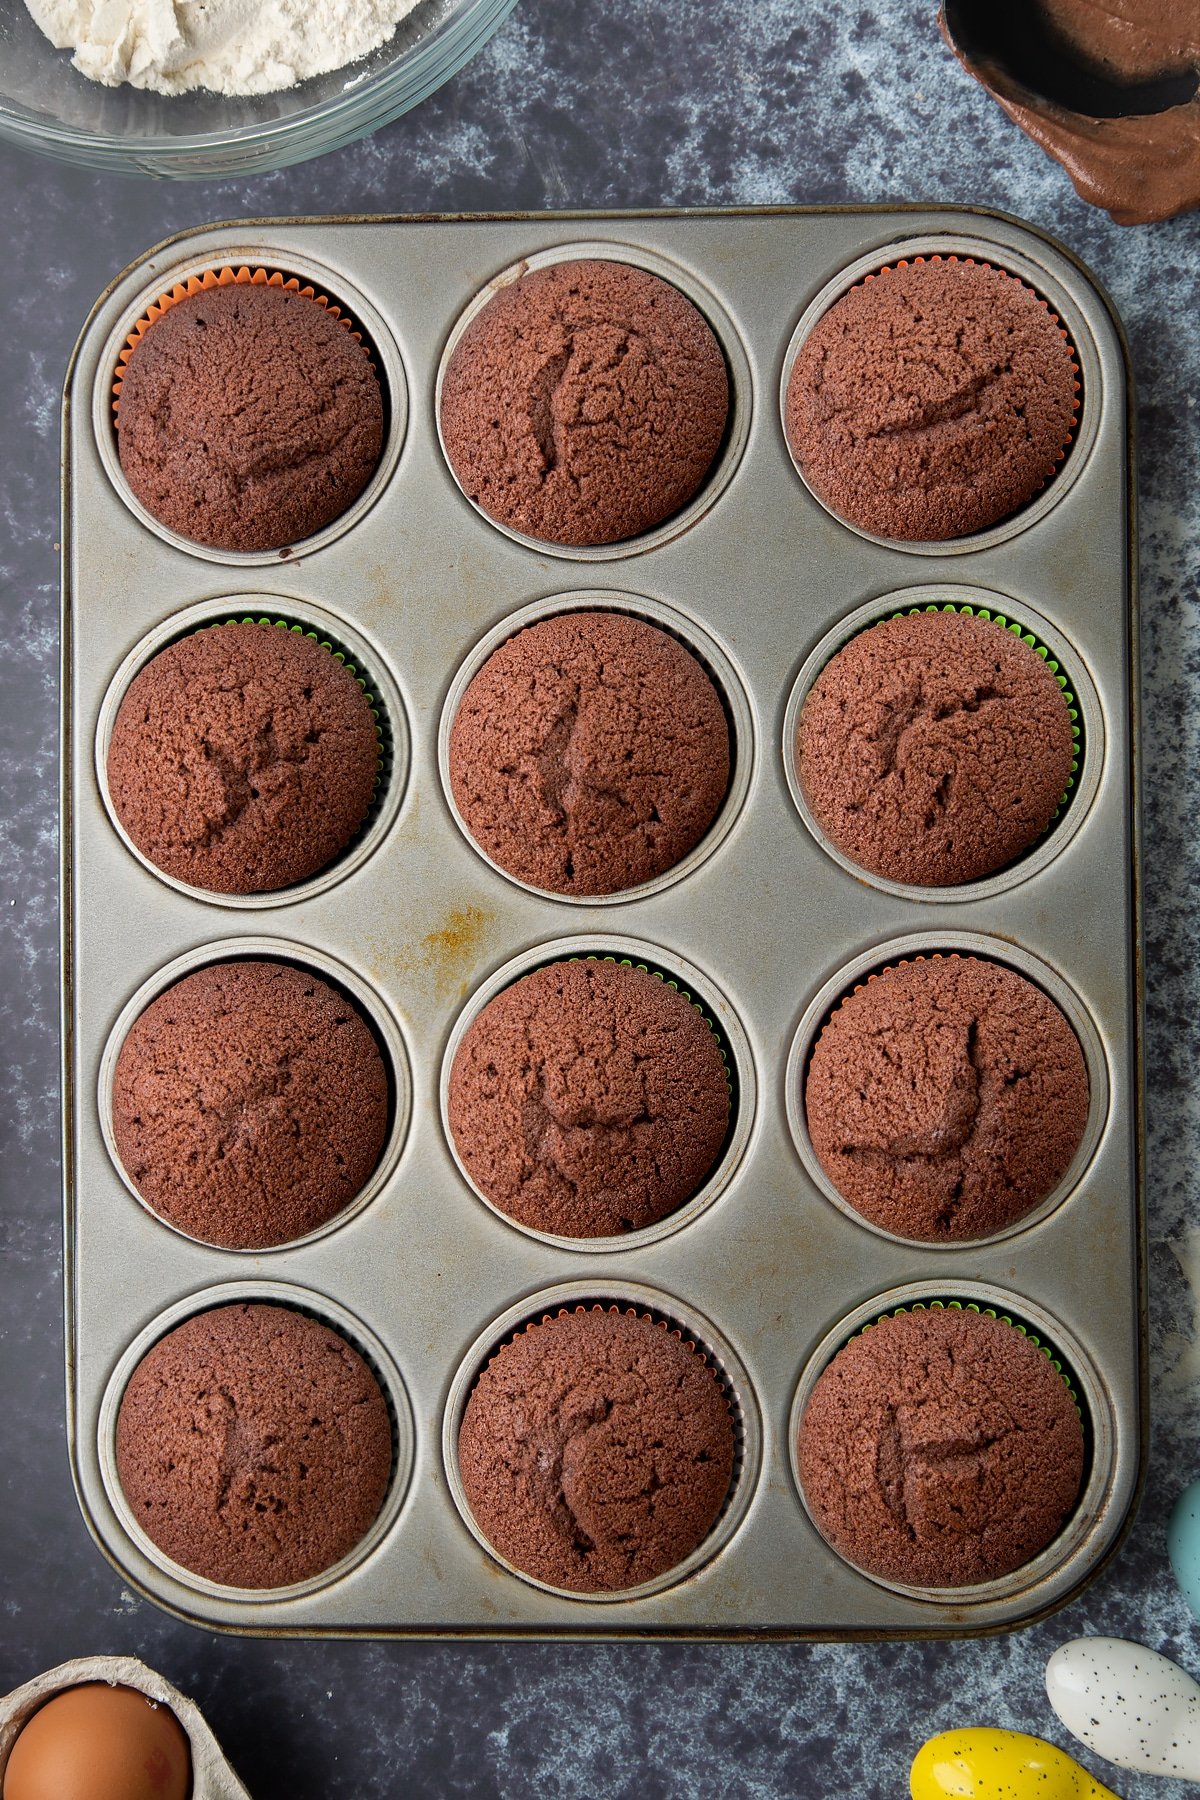 Freshly baked chocolate cupcake batter in a 12 hole muffin tray. Ingredients to make spider web cupcakes surround the tray.